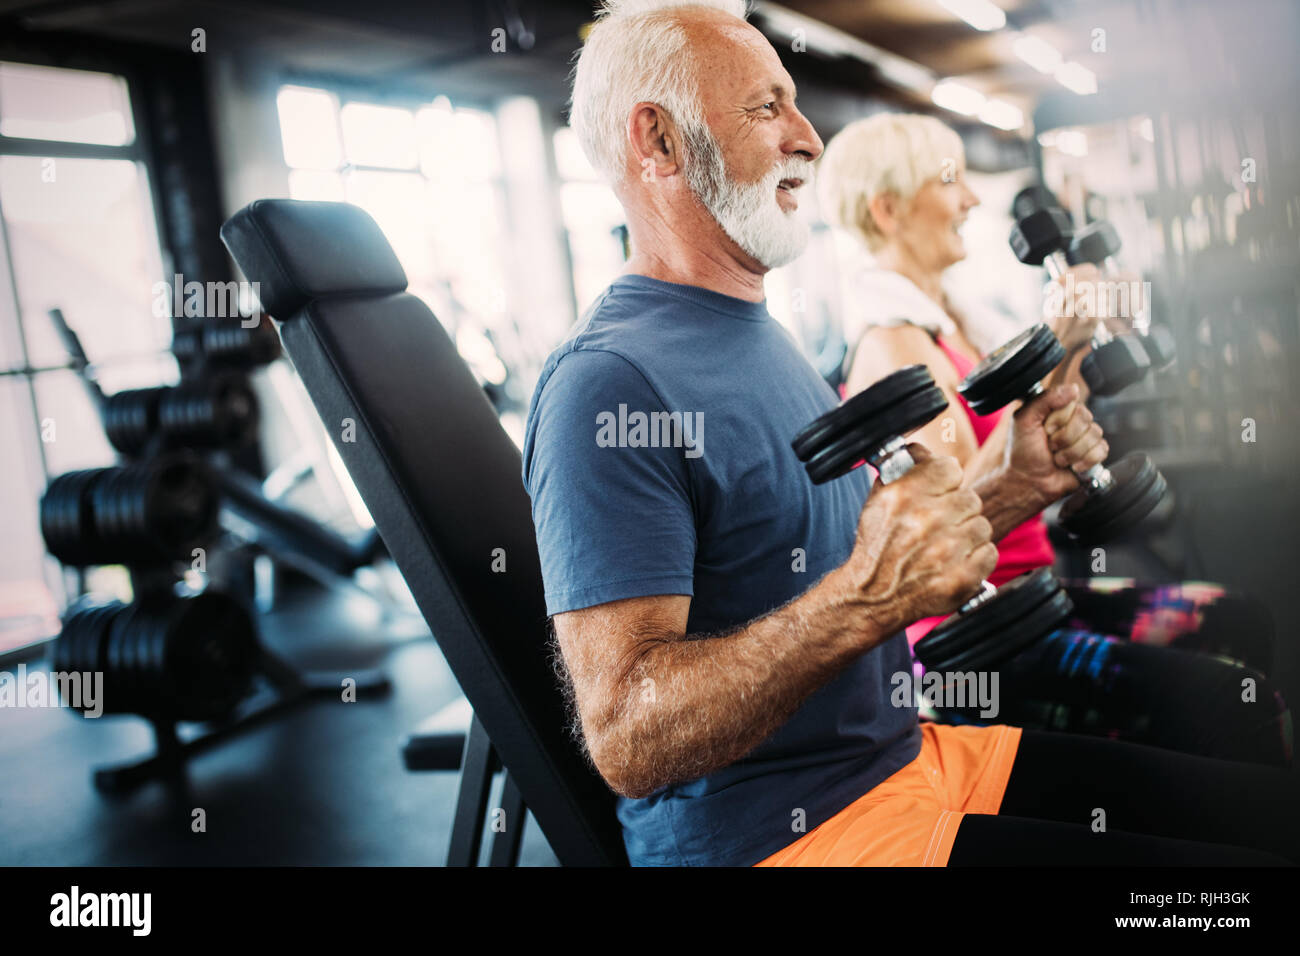 Fit Senior Sporty Couple Working Out Together At Gym Stock Photo Alamy